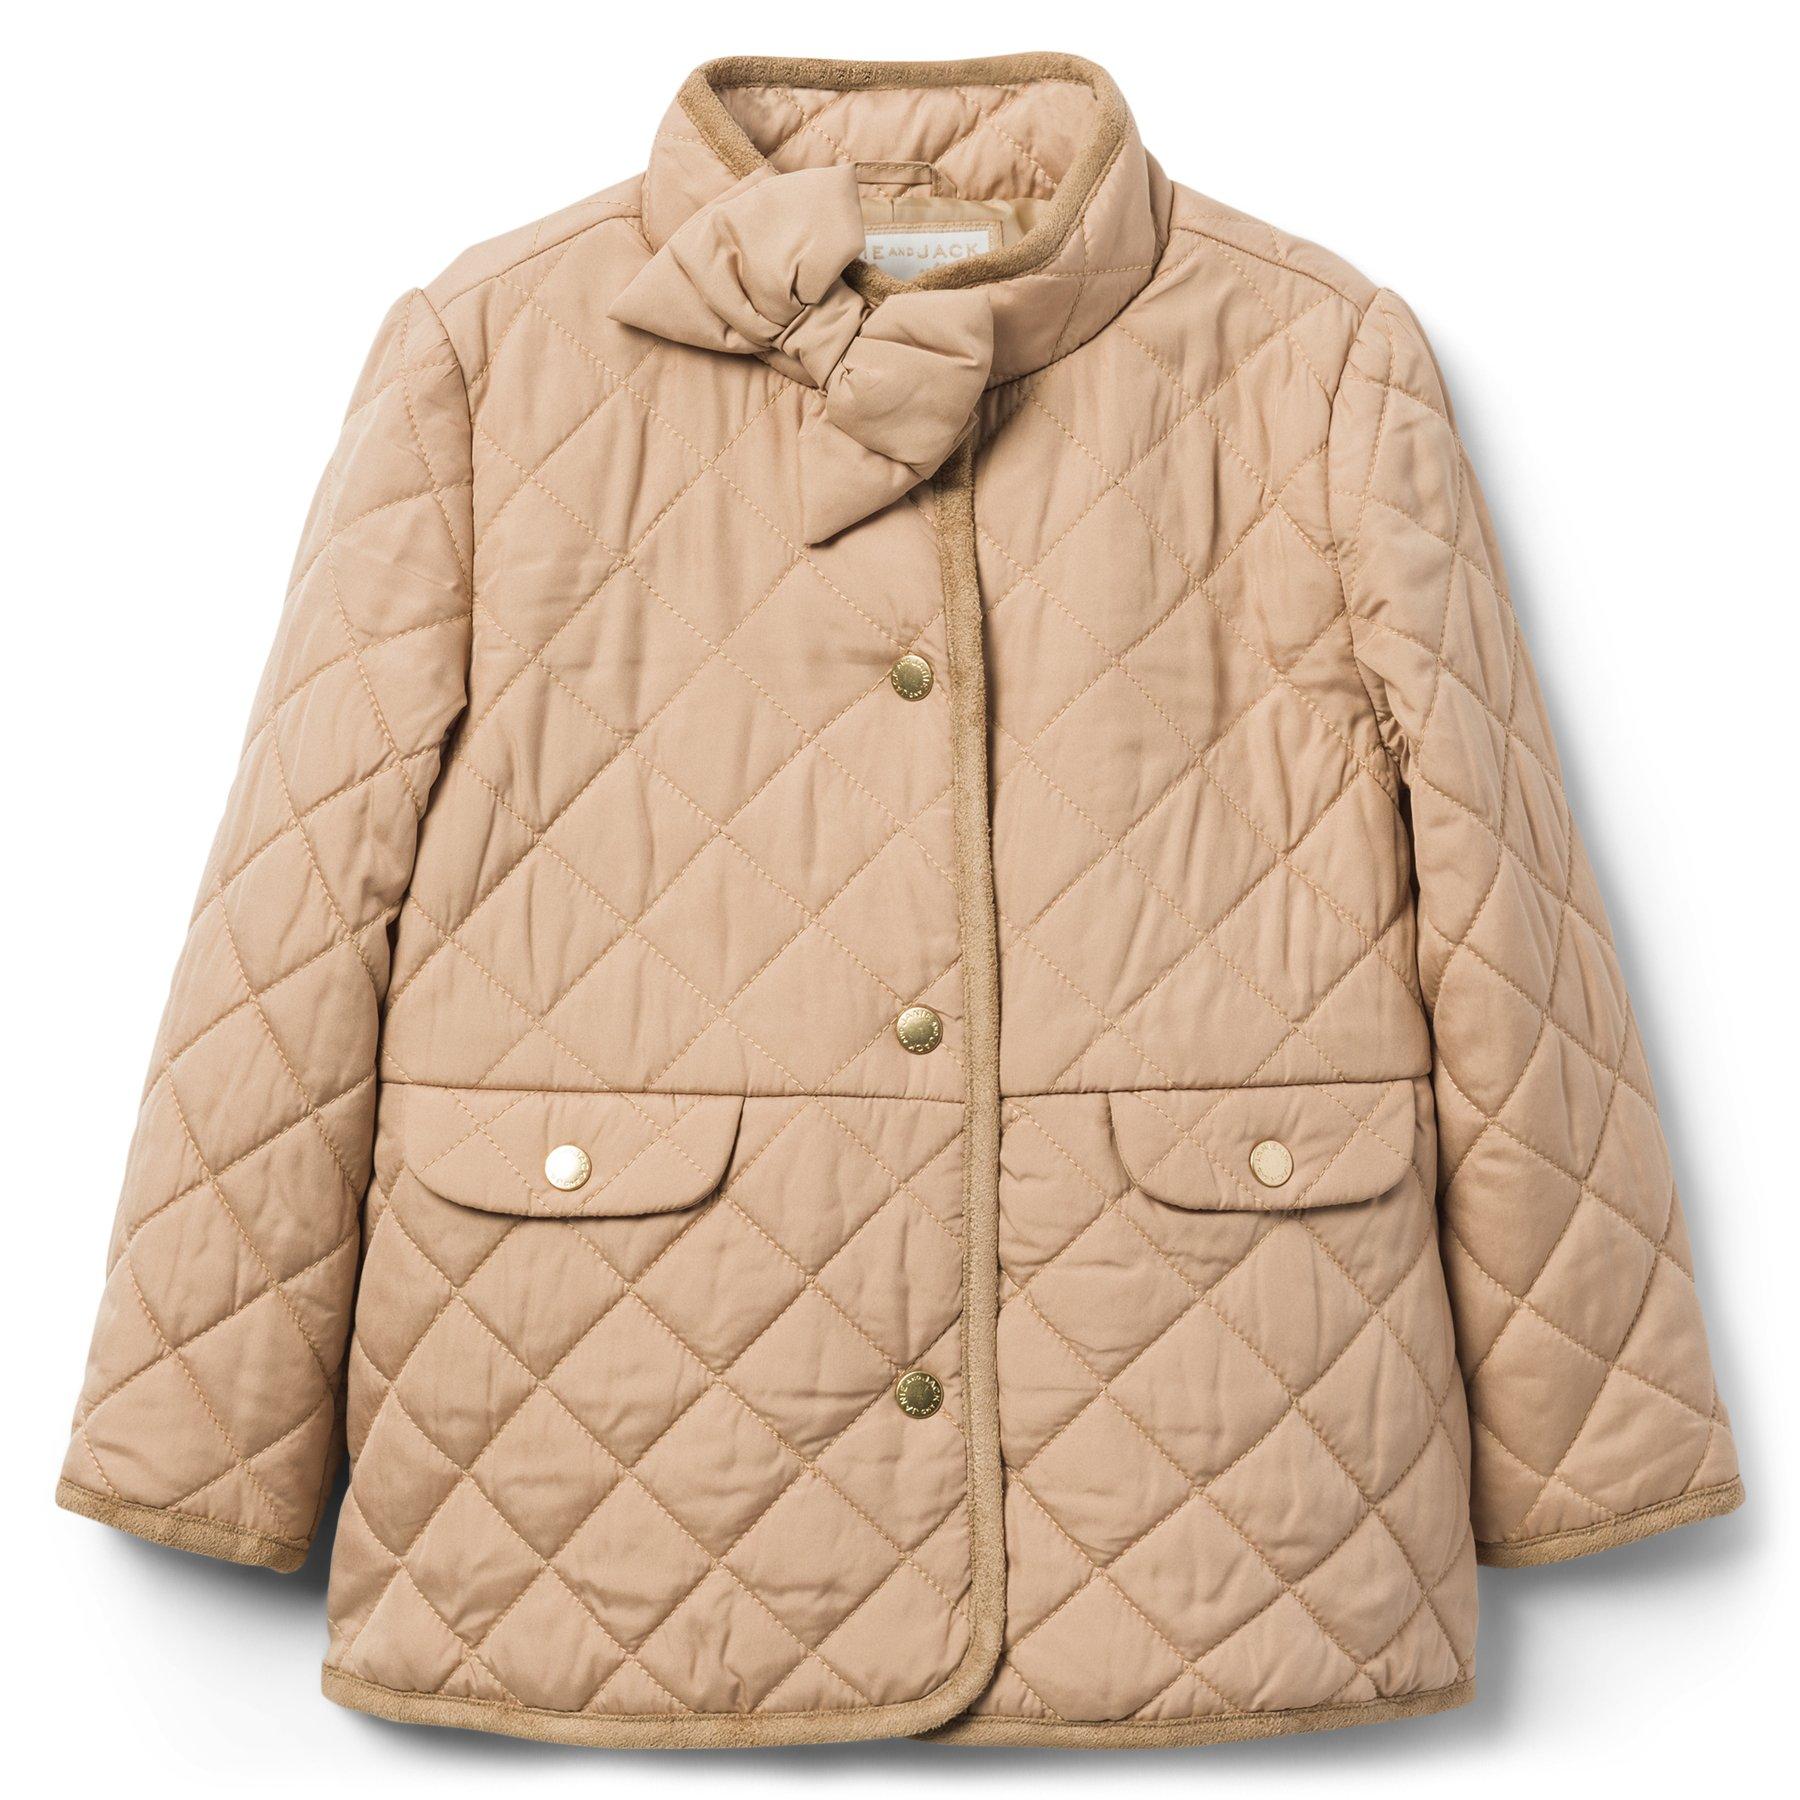 Quilted Bow Jacket 